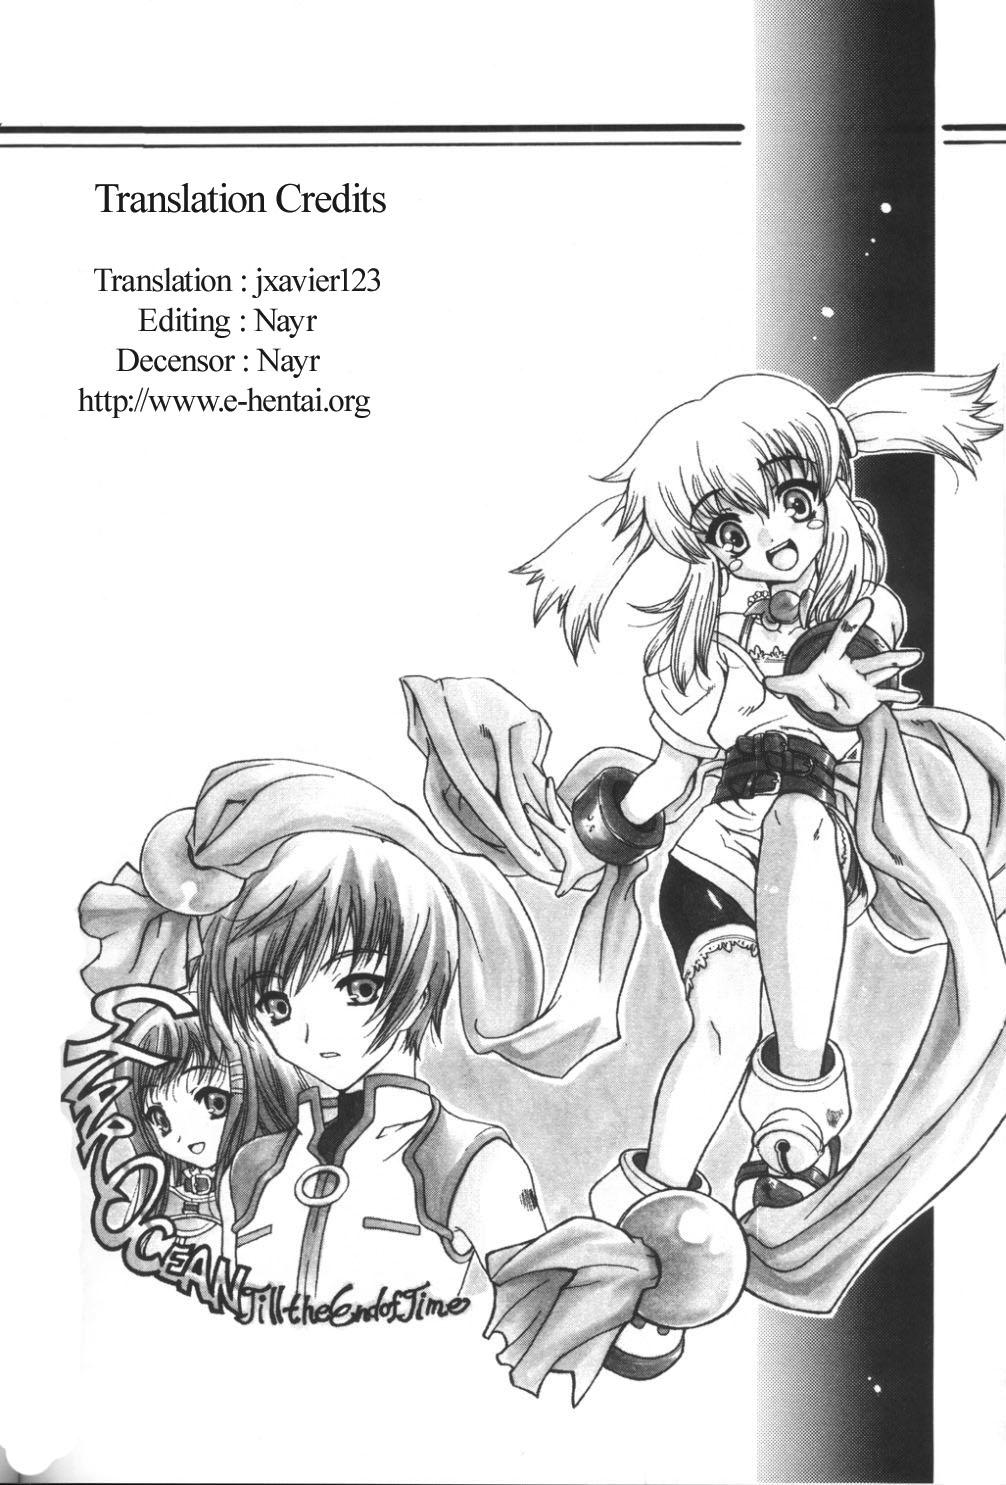 Chinese Daisan no Shoujo | The Third Girl - Star ocean 3 Casting - Page 22